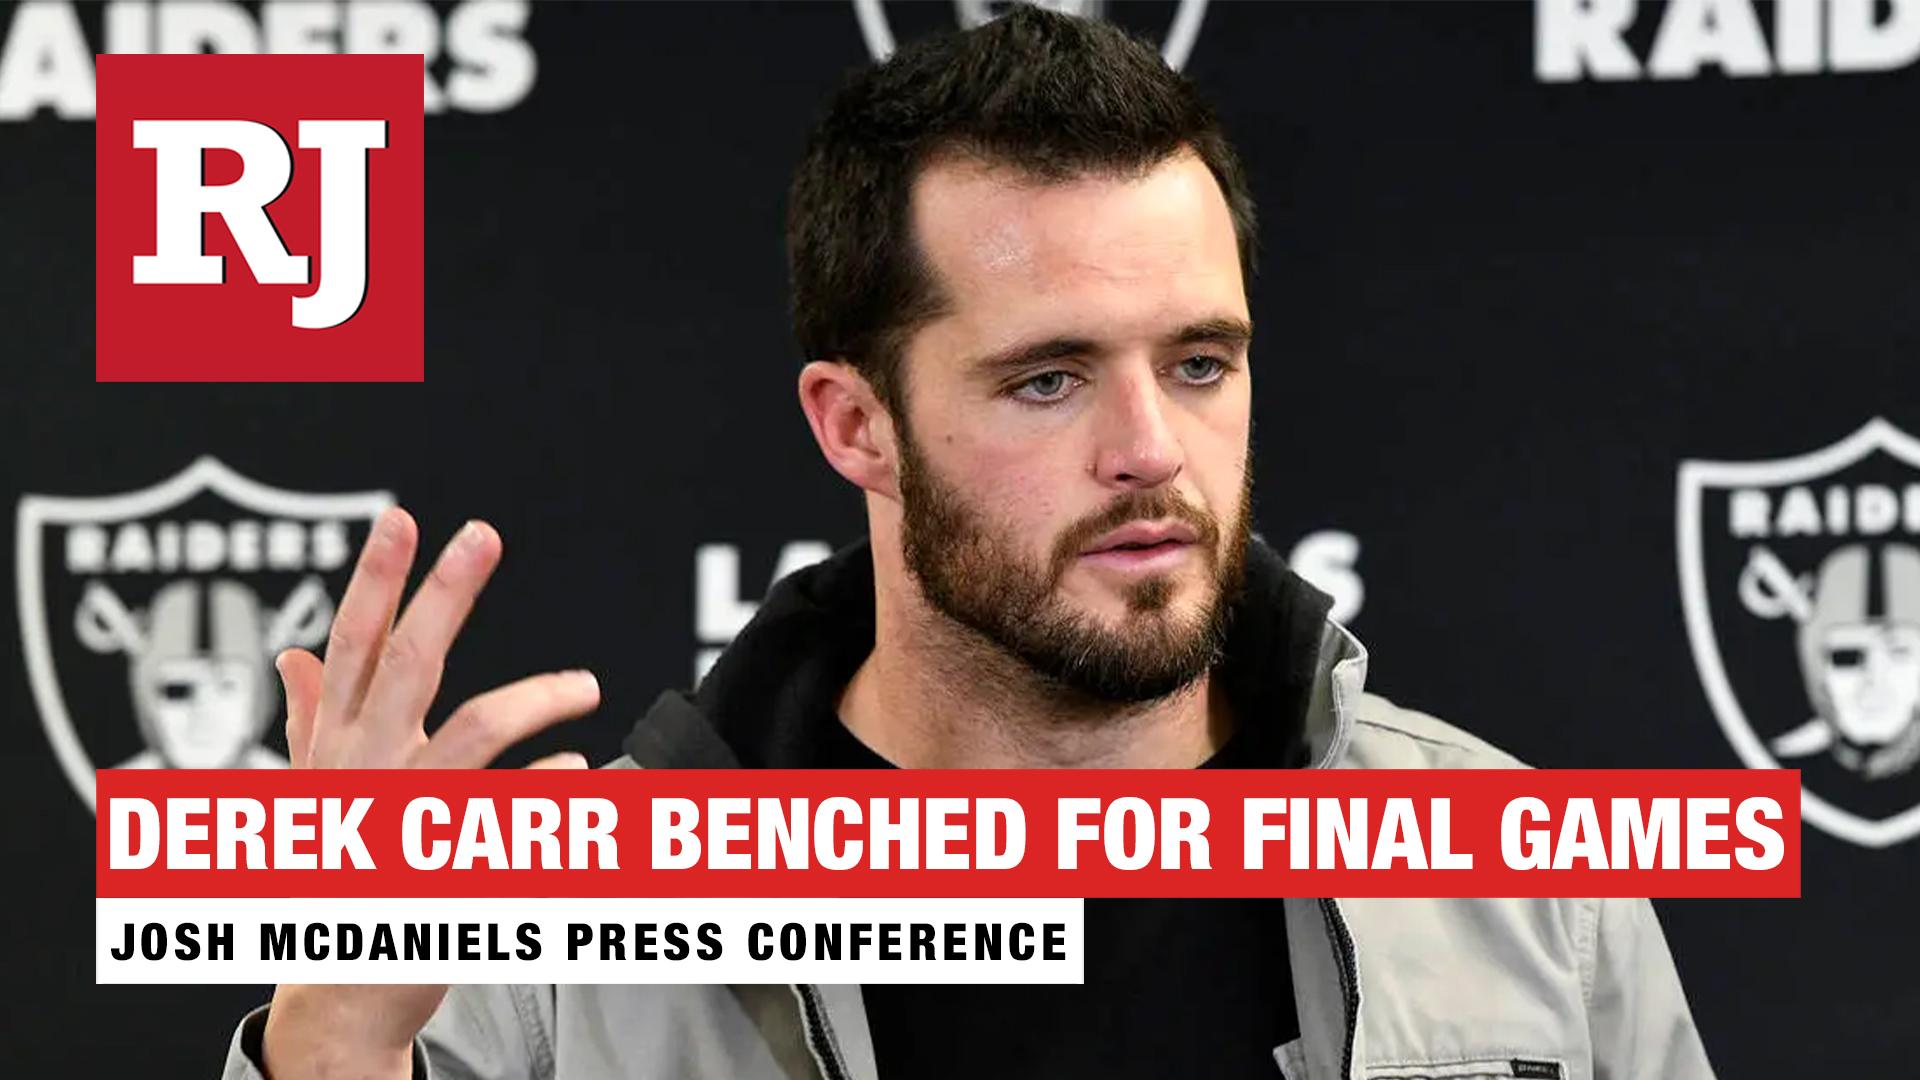 Carr benched for remainder of season